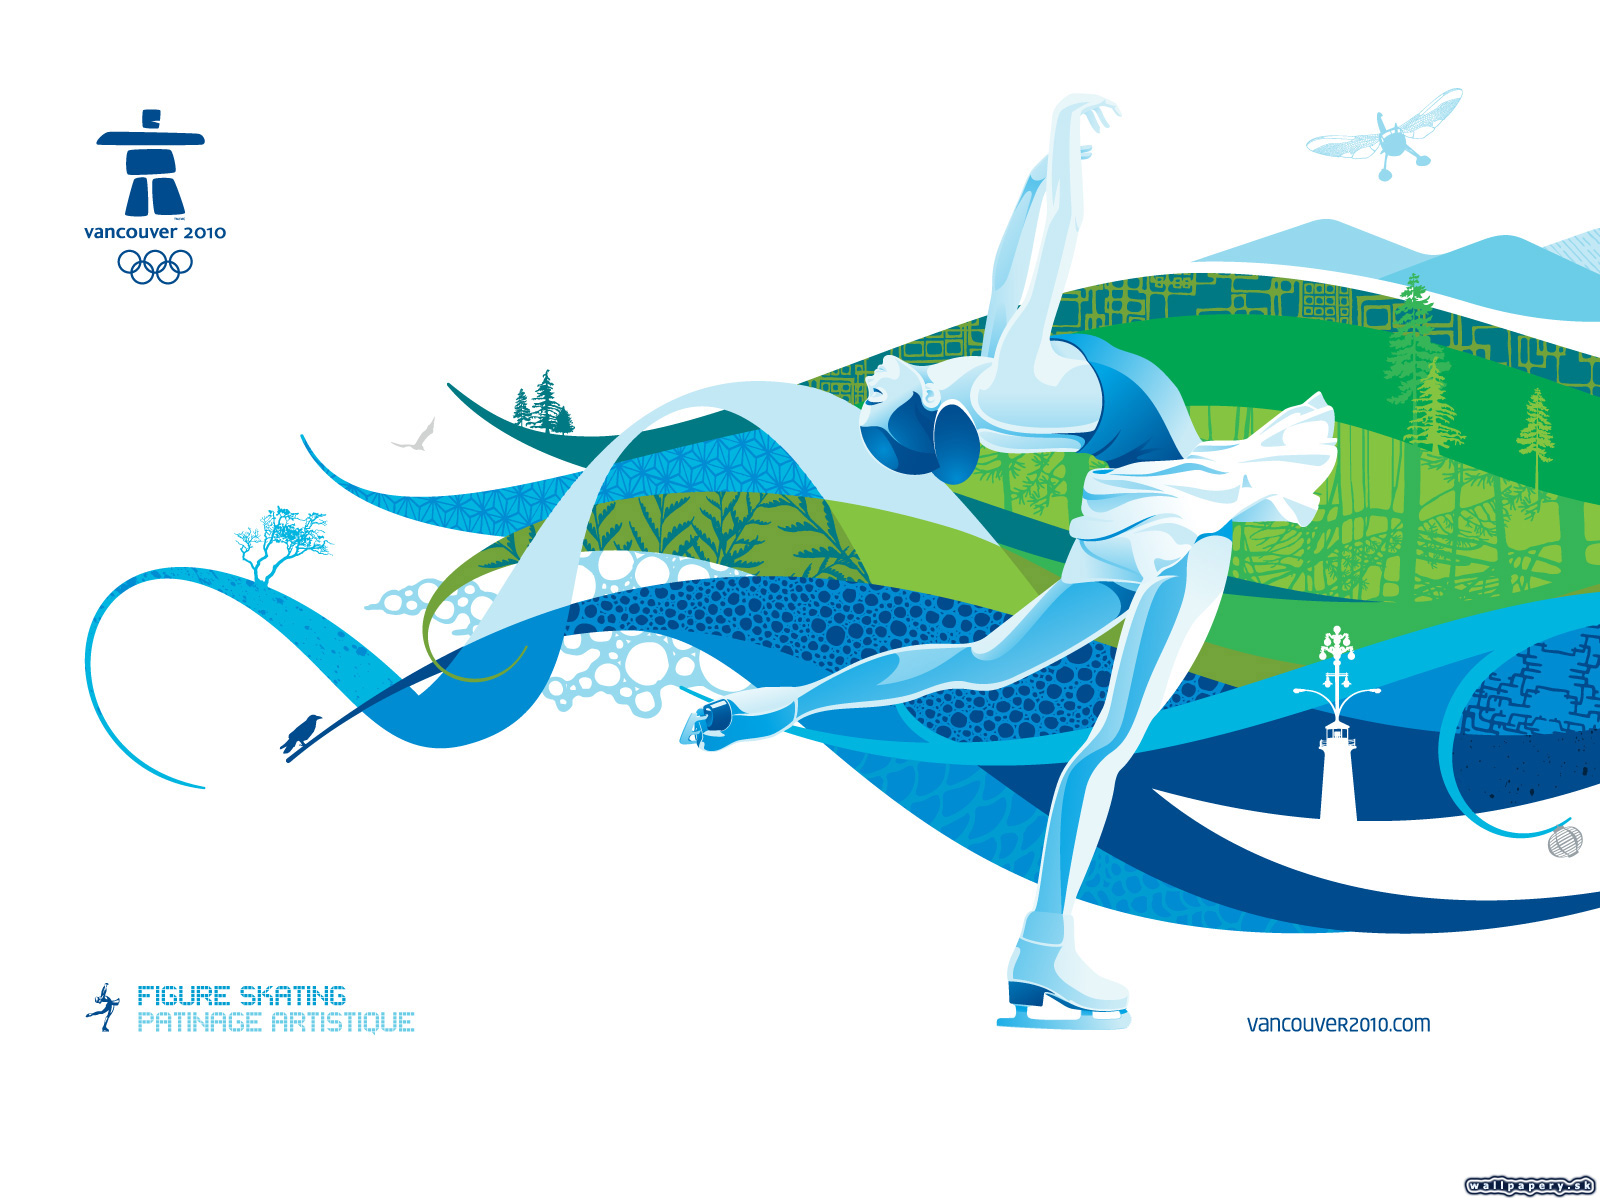 Vancouver 2010 - The Official Video Game of the Olympic Winter Games - wallpaper 18